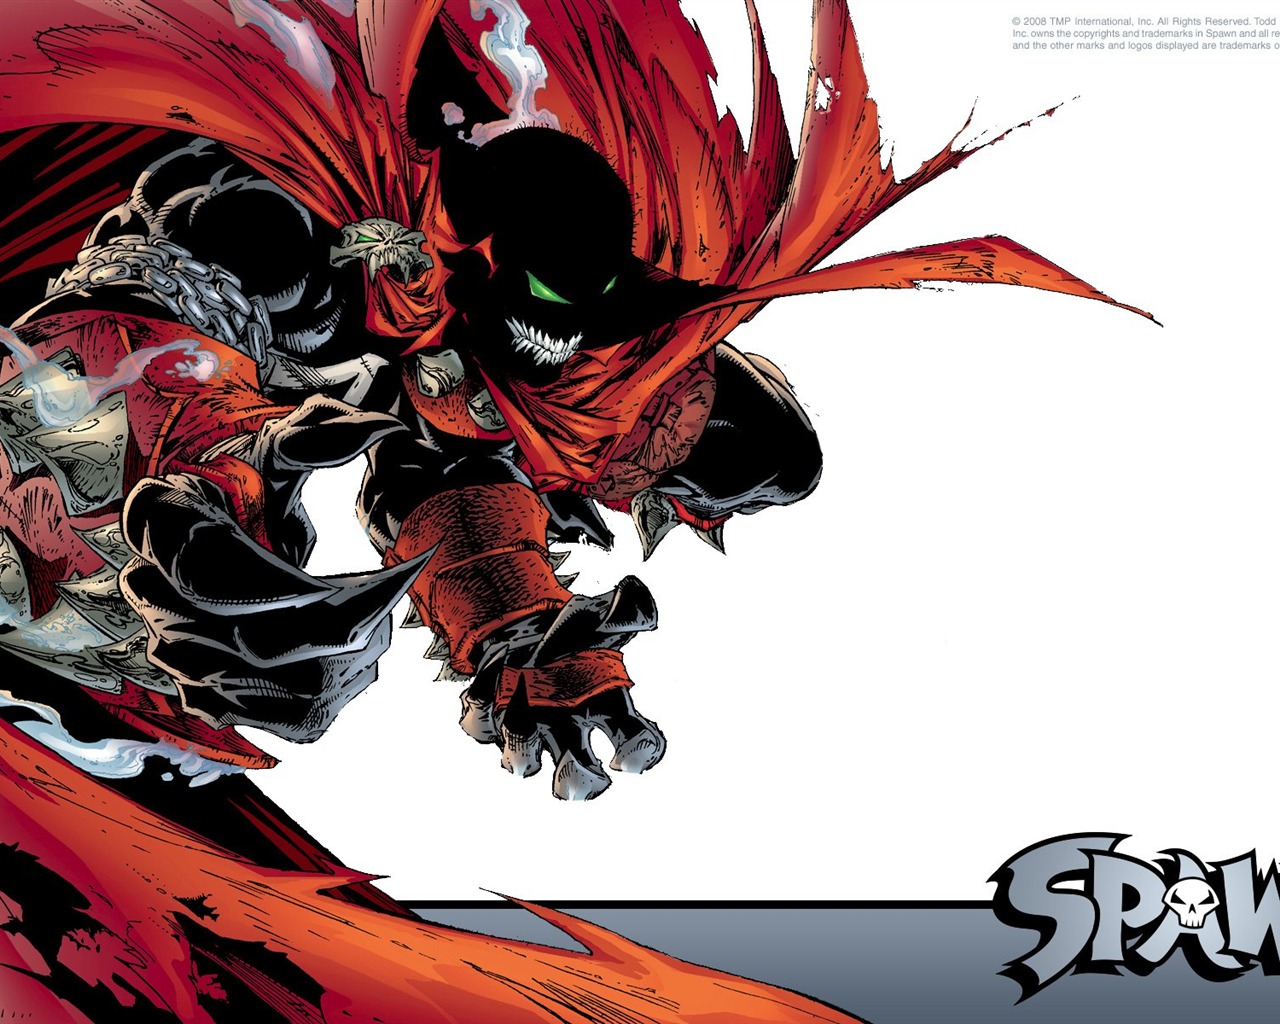 Spawn HD Wallpapers #25 - 1280x1024